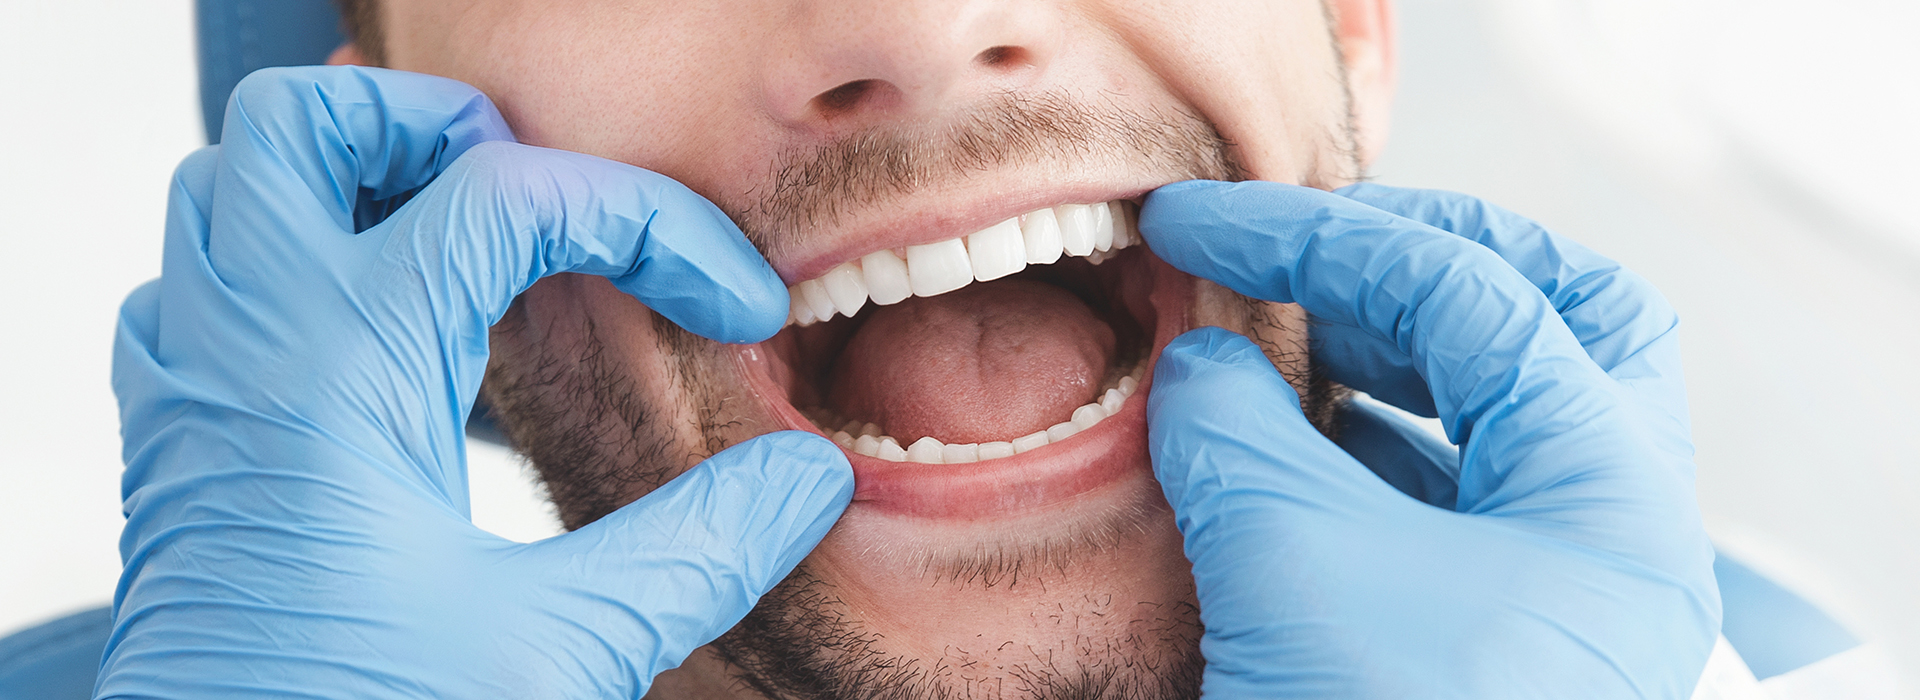 Hagerstown Family Dental | Periodontal Treatment, Root Canals and TMJ Disorders